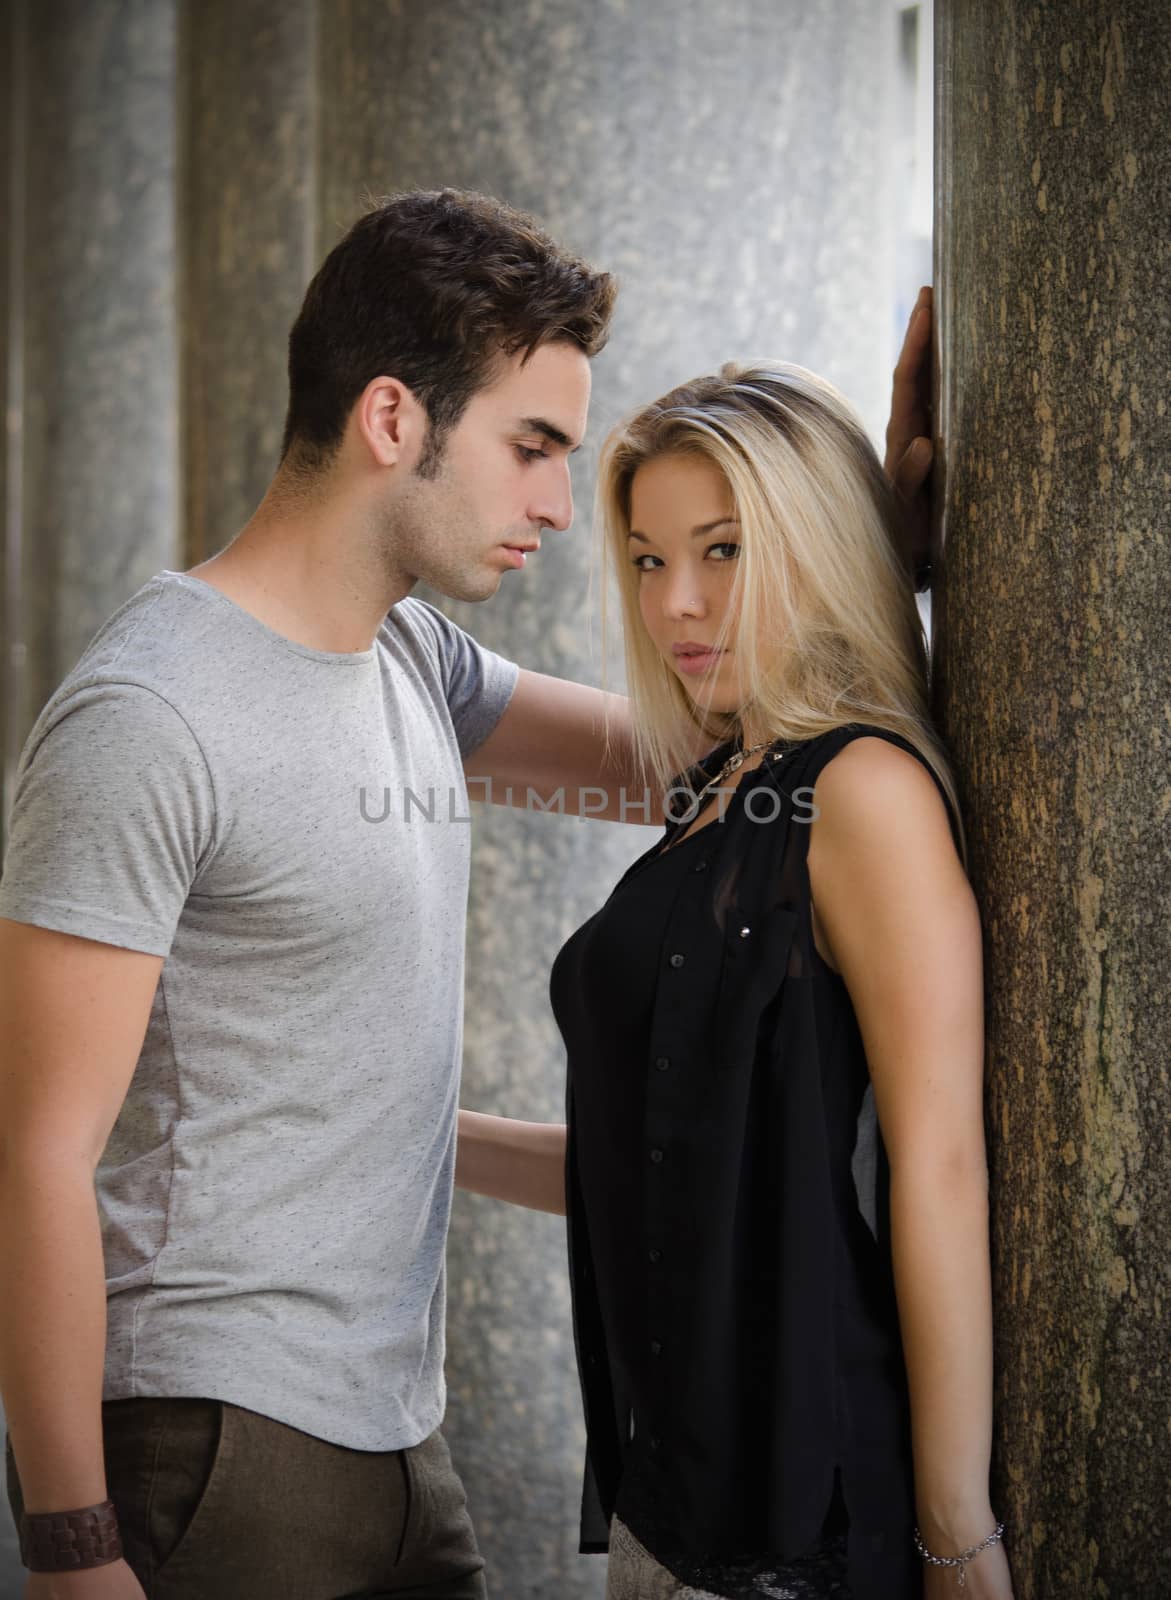 Attractive couple, young man and girl standing next to each other, marble columns behind